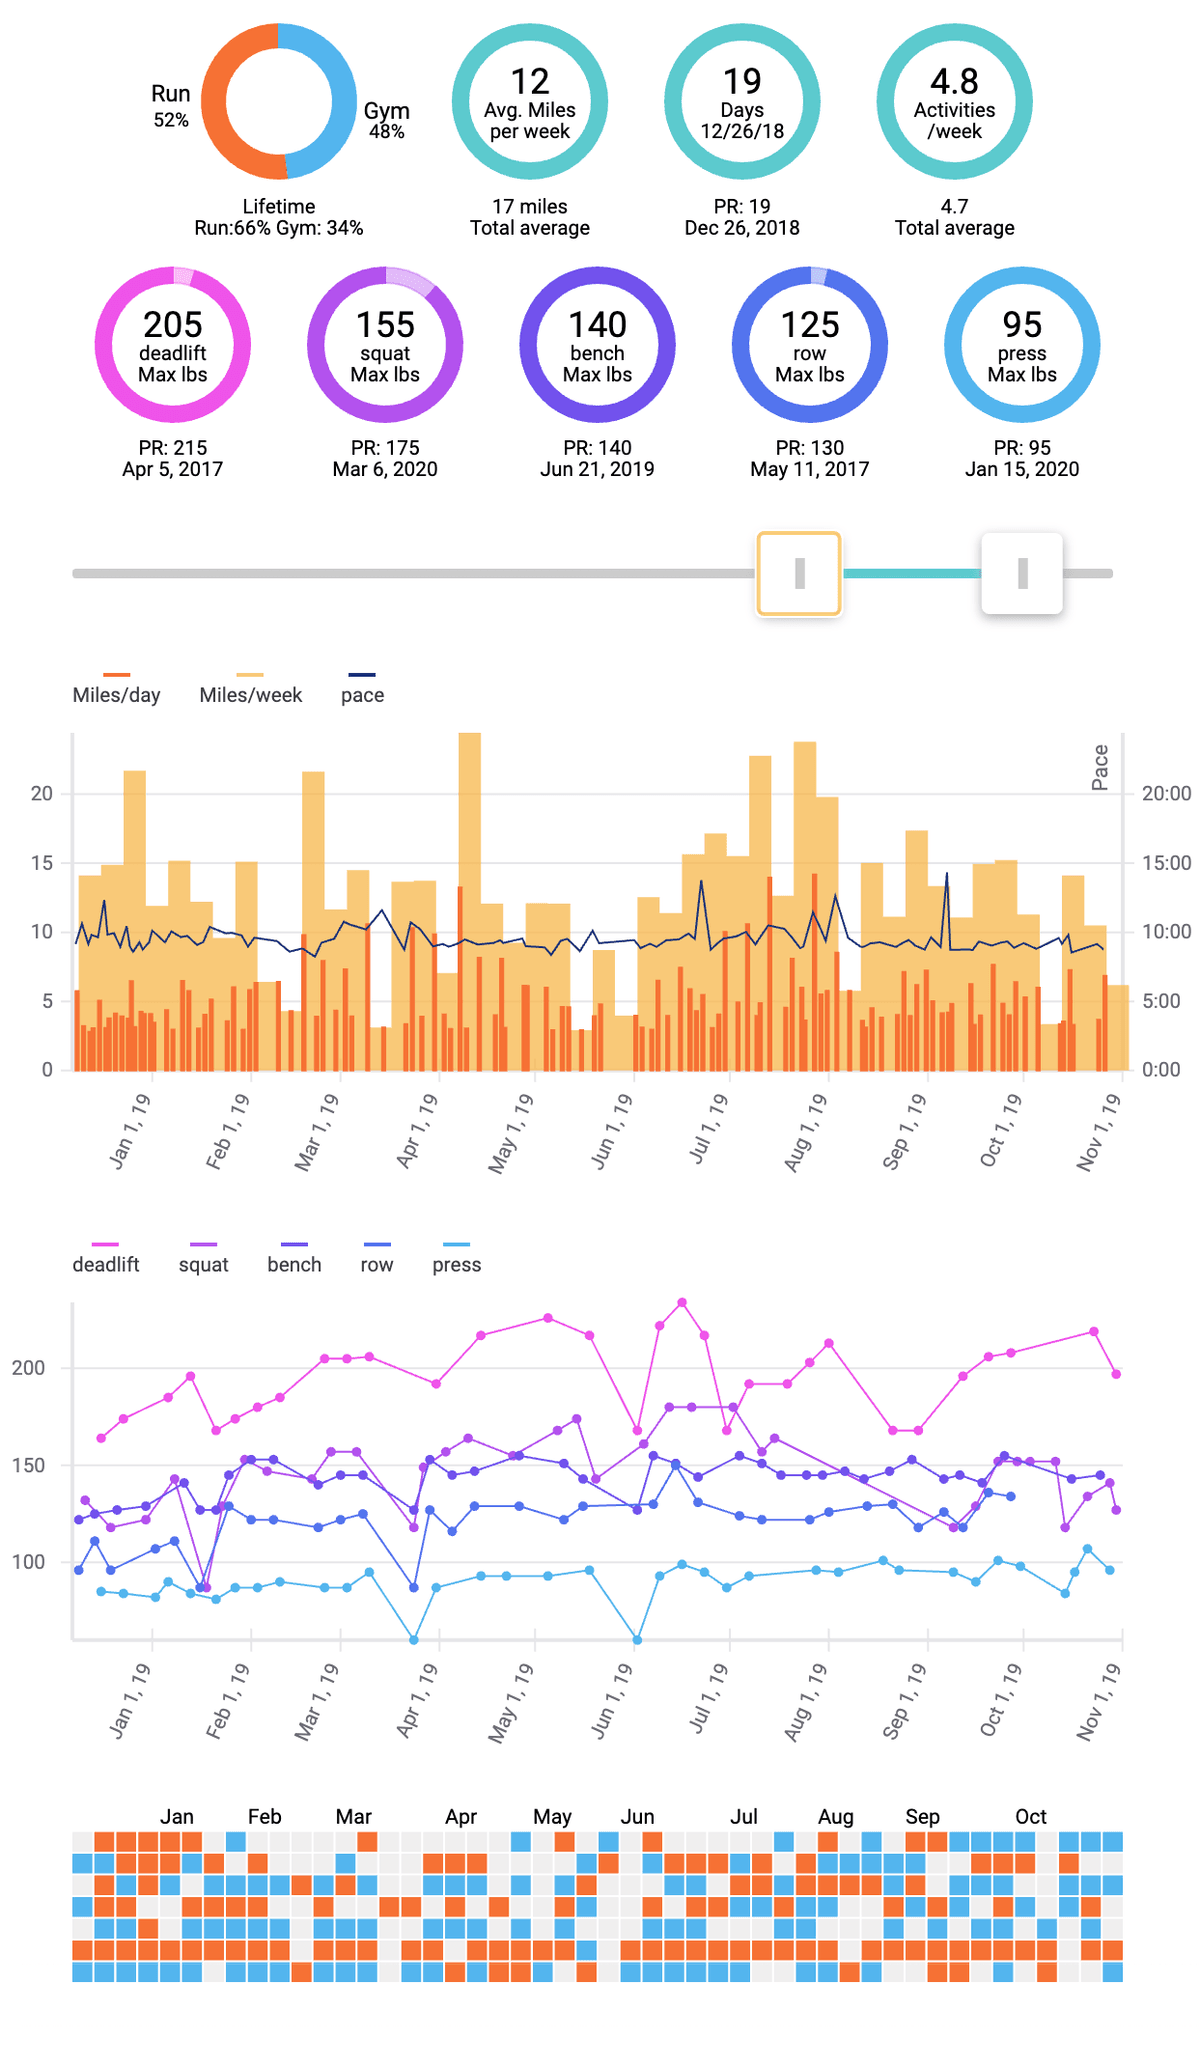 Stacking along the date x-axis lets you see everything in one view